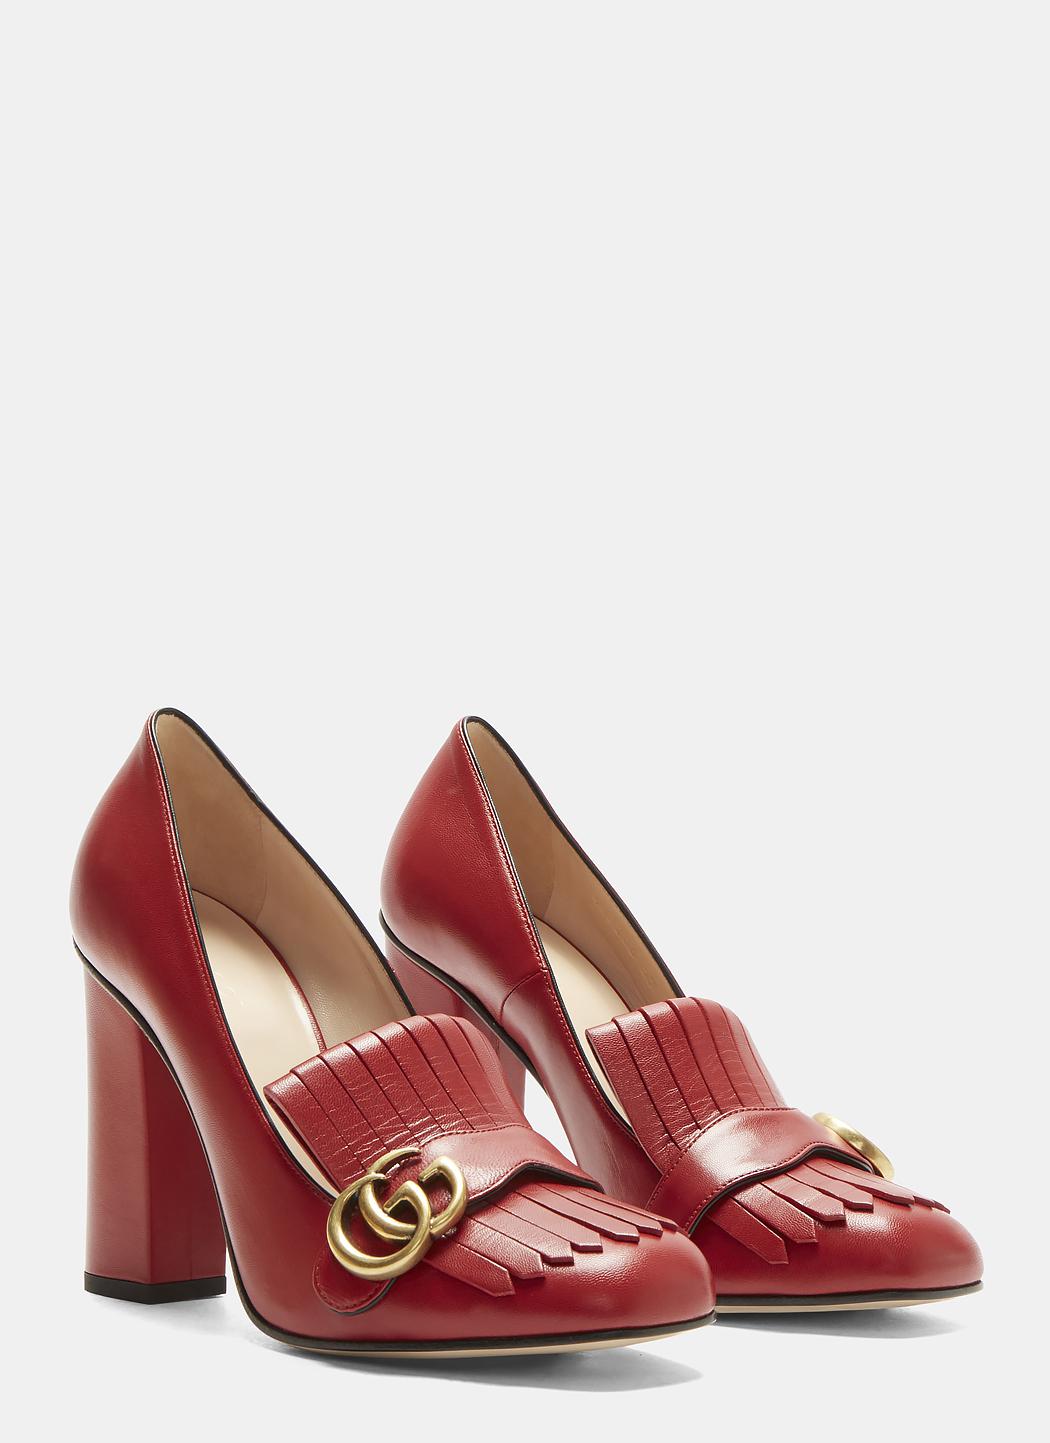 Gucci Leather GG High-heel Fringed Marmont Pumps In Red - Lyst